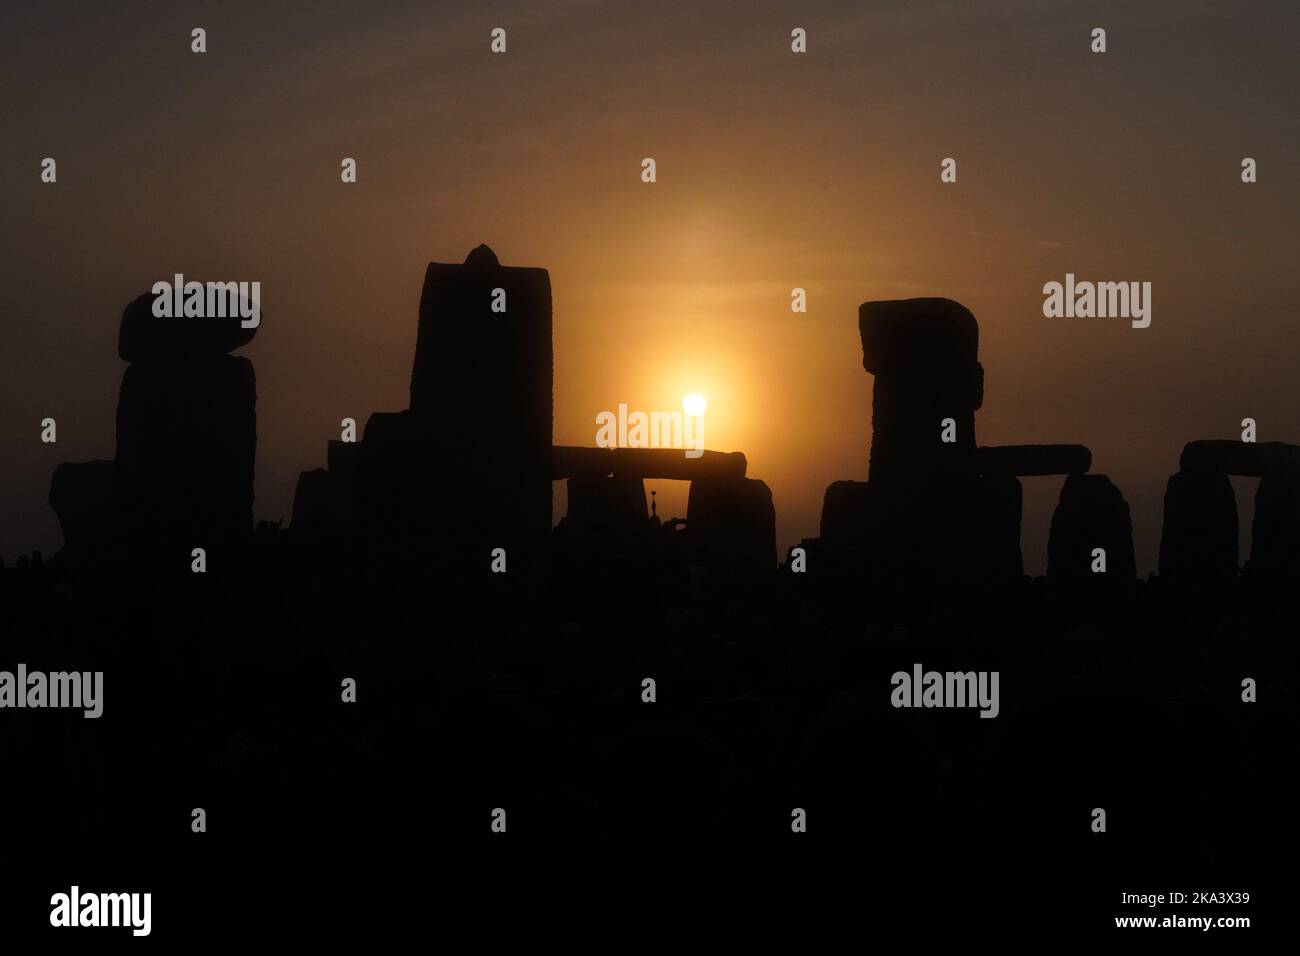 People from around the world descend on western England to celebrate the summer solstice with the rising of the sun at Stonehenge. Stonehenge is a pre-historic monument on the Salisbury Plain of England. Archaeologists believe this UNESCO World Heritage Site to have begun construction in 3100BC. Stock Photo